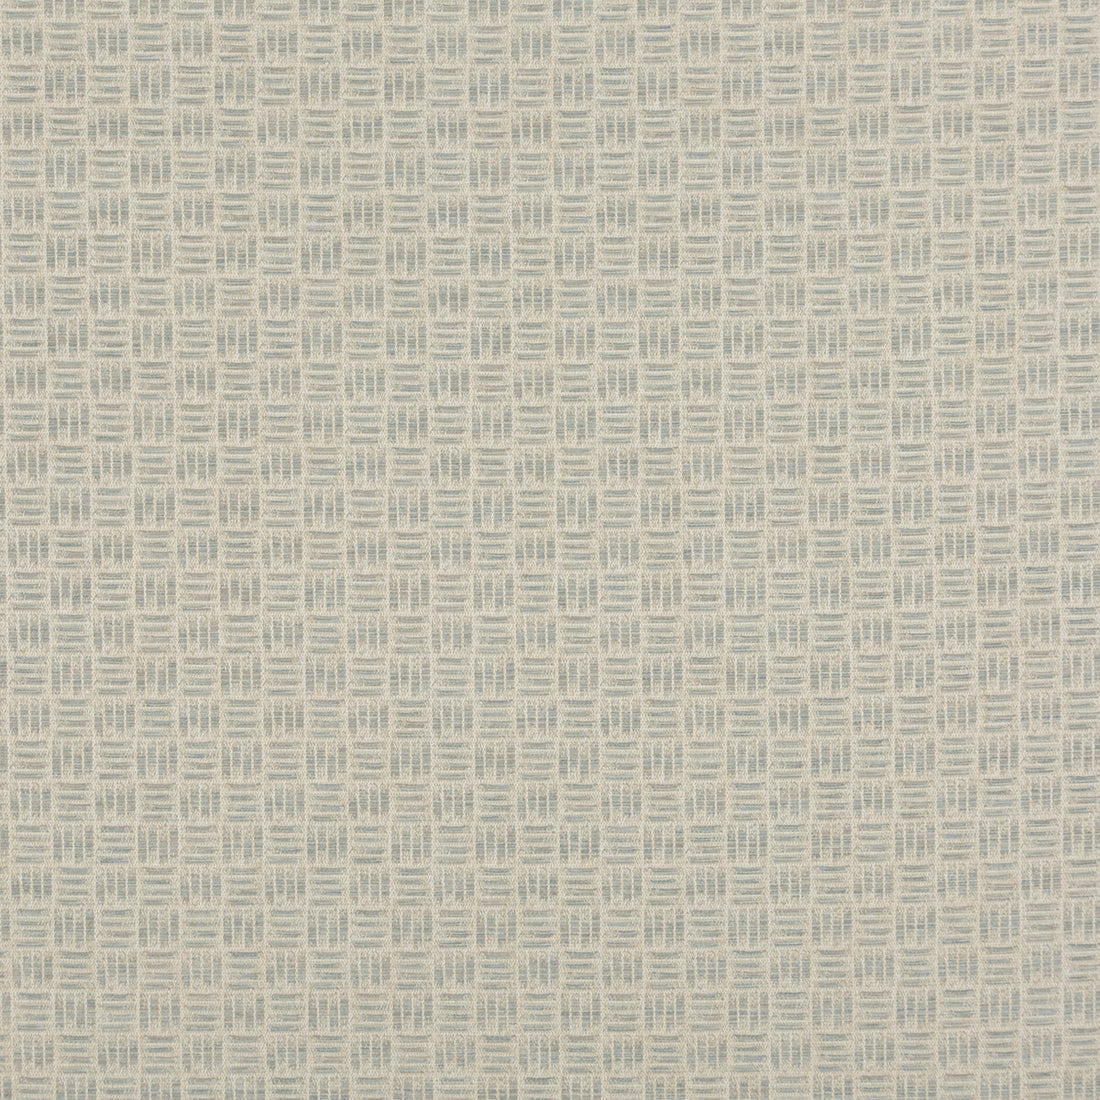 Seismic fabric in sea foam color - pattern BF10687.721.0 - by G P &amp; J Baker in the Essential Colours collection